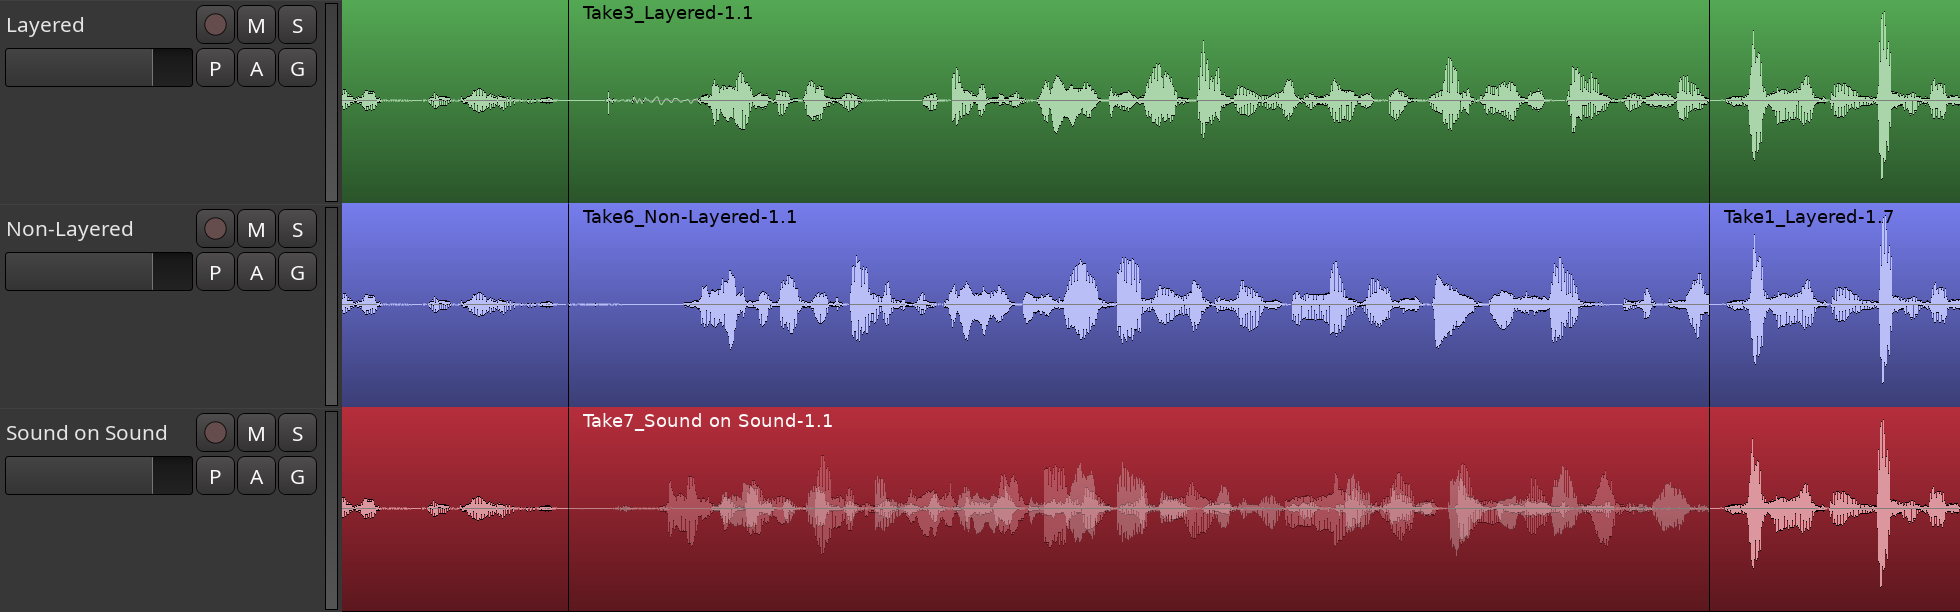 Layered, non-layered, and sound-on-sound modes